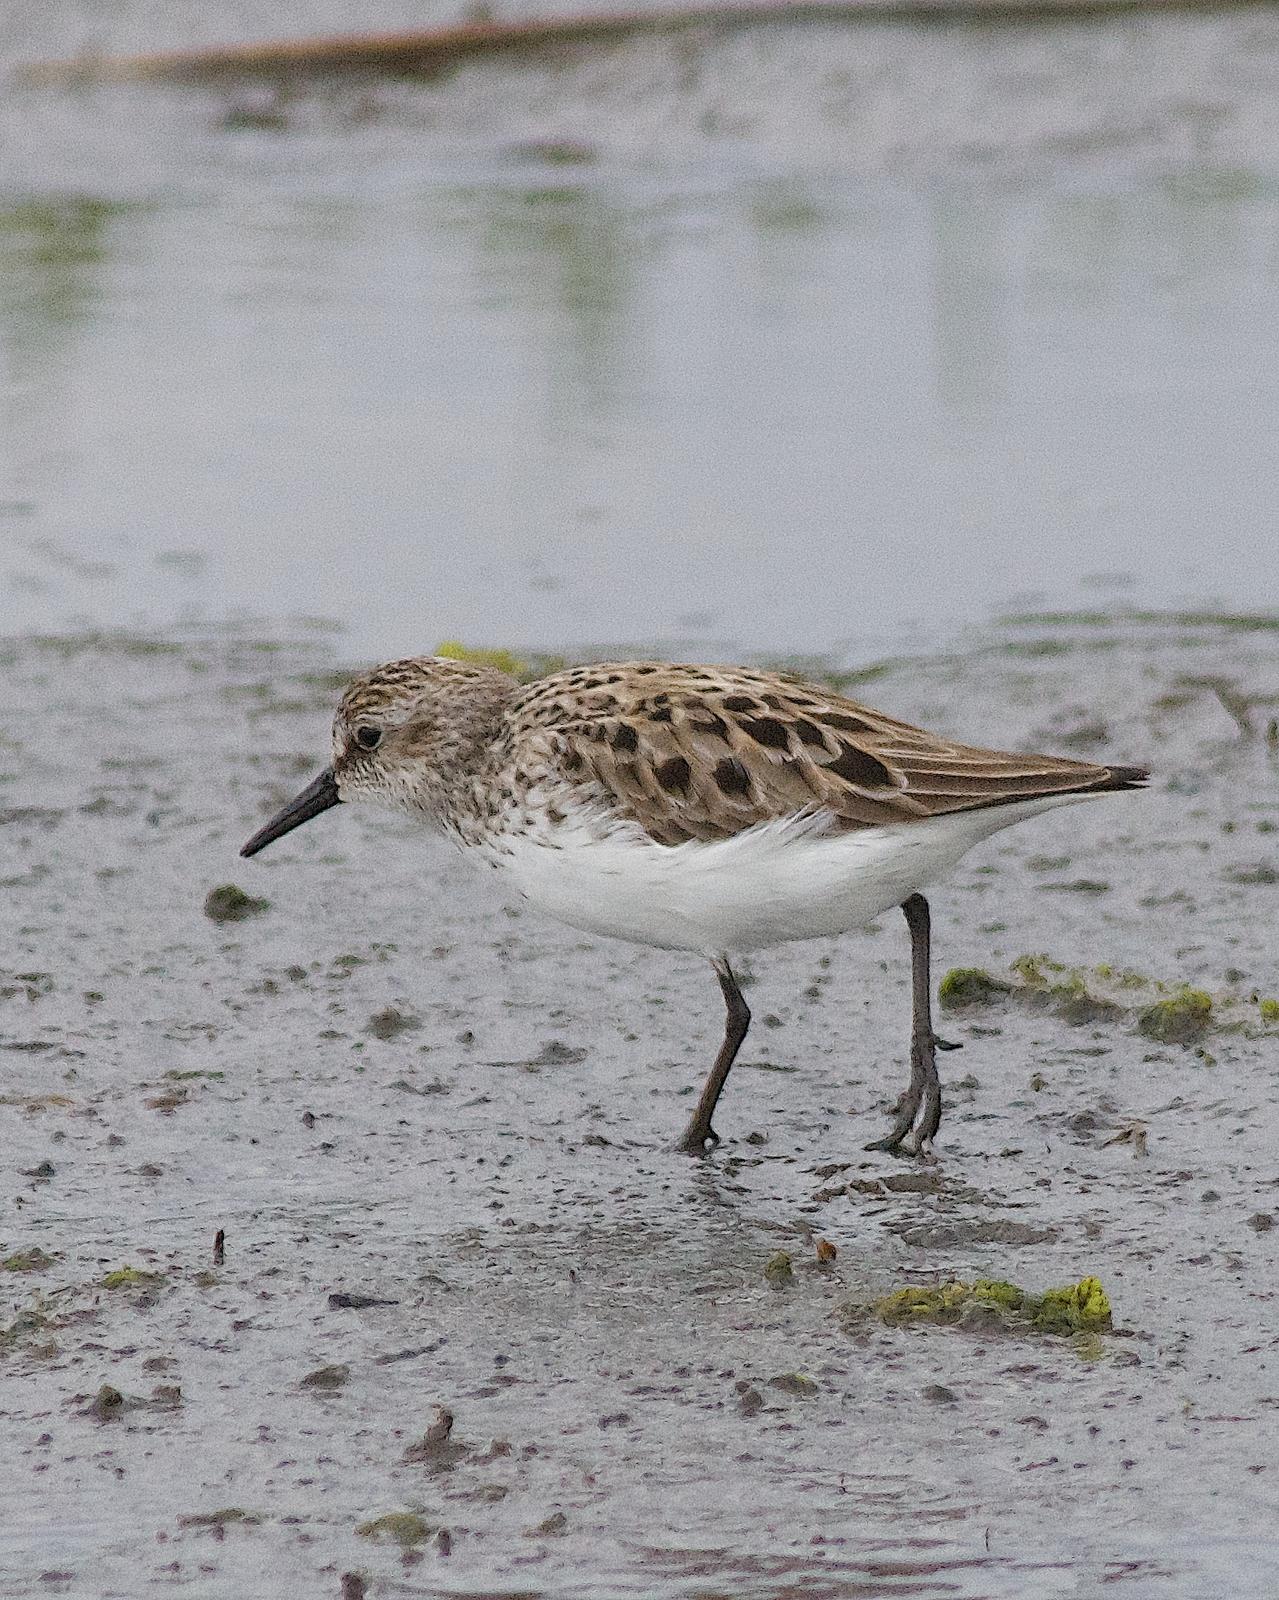 Semipalmated Sandpiper Photo by Gerald Hoekstra